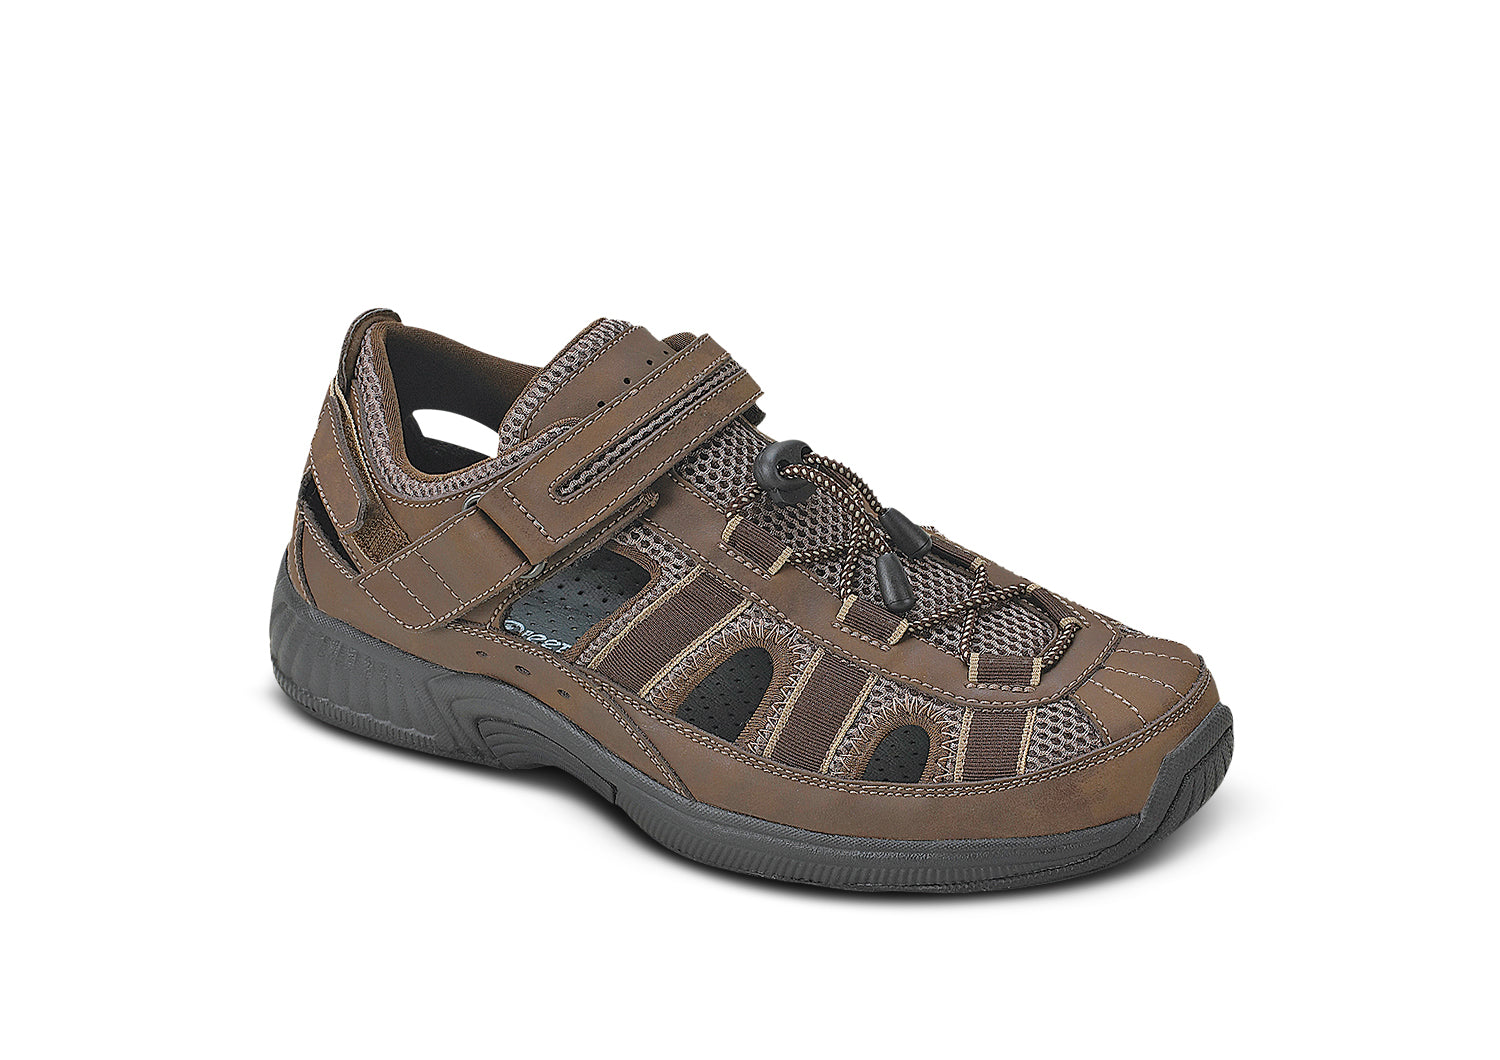 Back Country Men's Closed Back Sandals Brown | The Warehouse